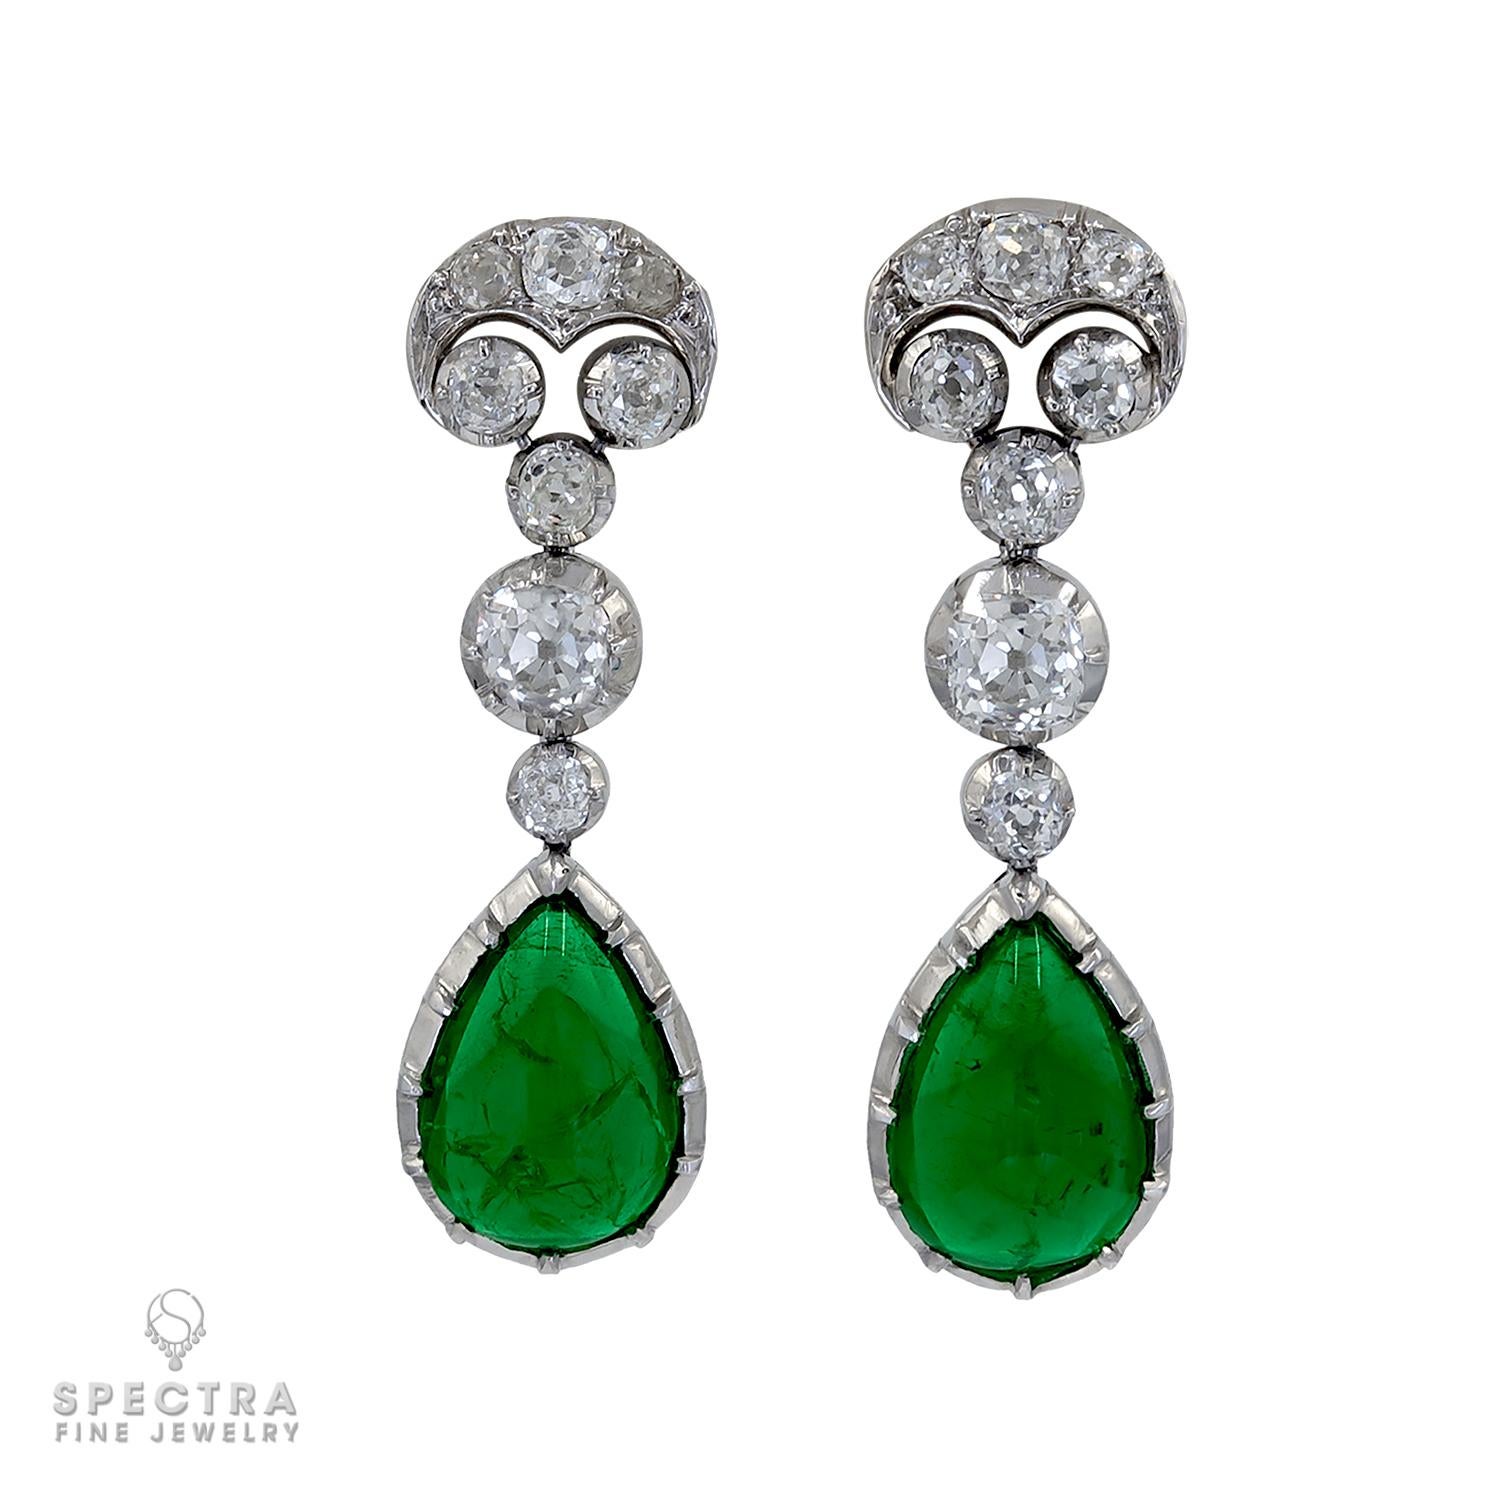 These Vintage Art Deco Diamond Emerald Drop Earrings, made during the Art Deco Era, have all the allure of a time past. The design is rooted in Georgian and Victorian jewelry but was brought into the Deco period (approx. 1919-1939). The focal point